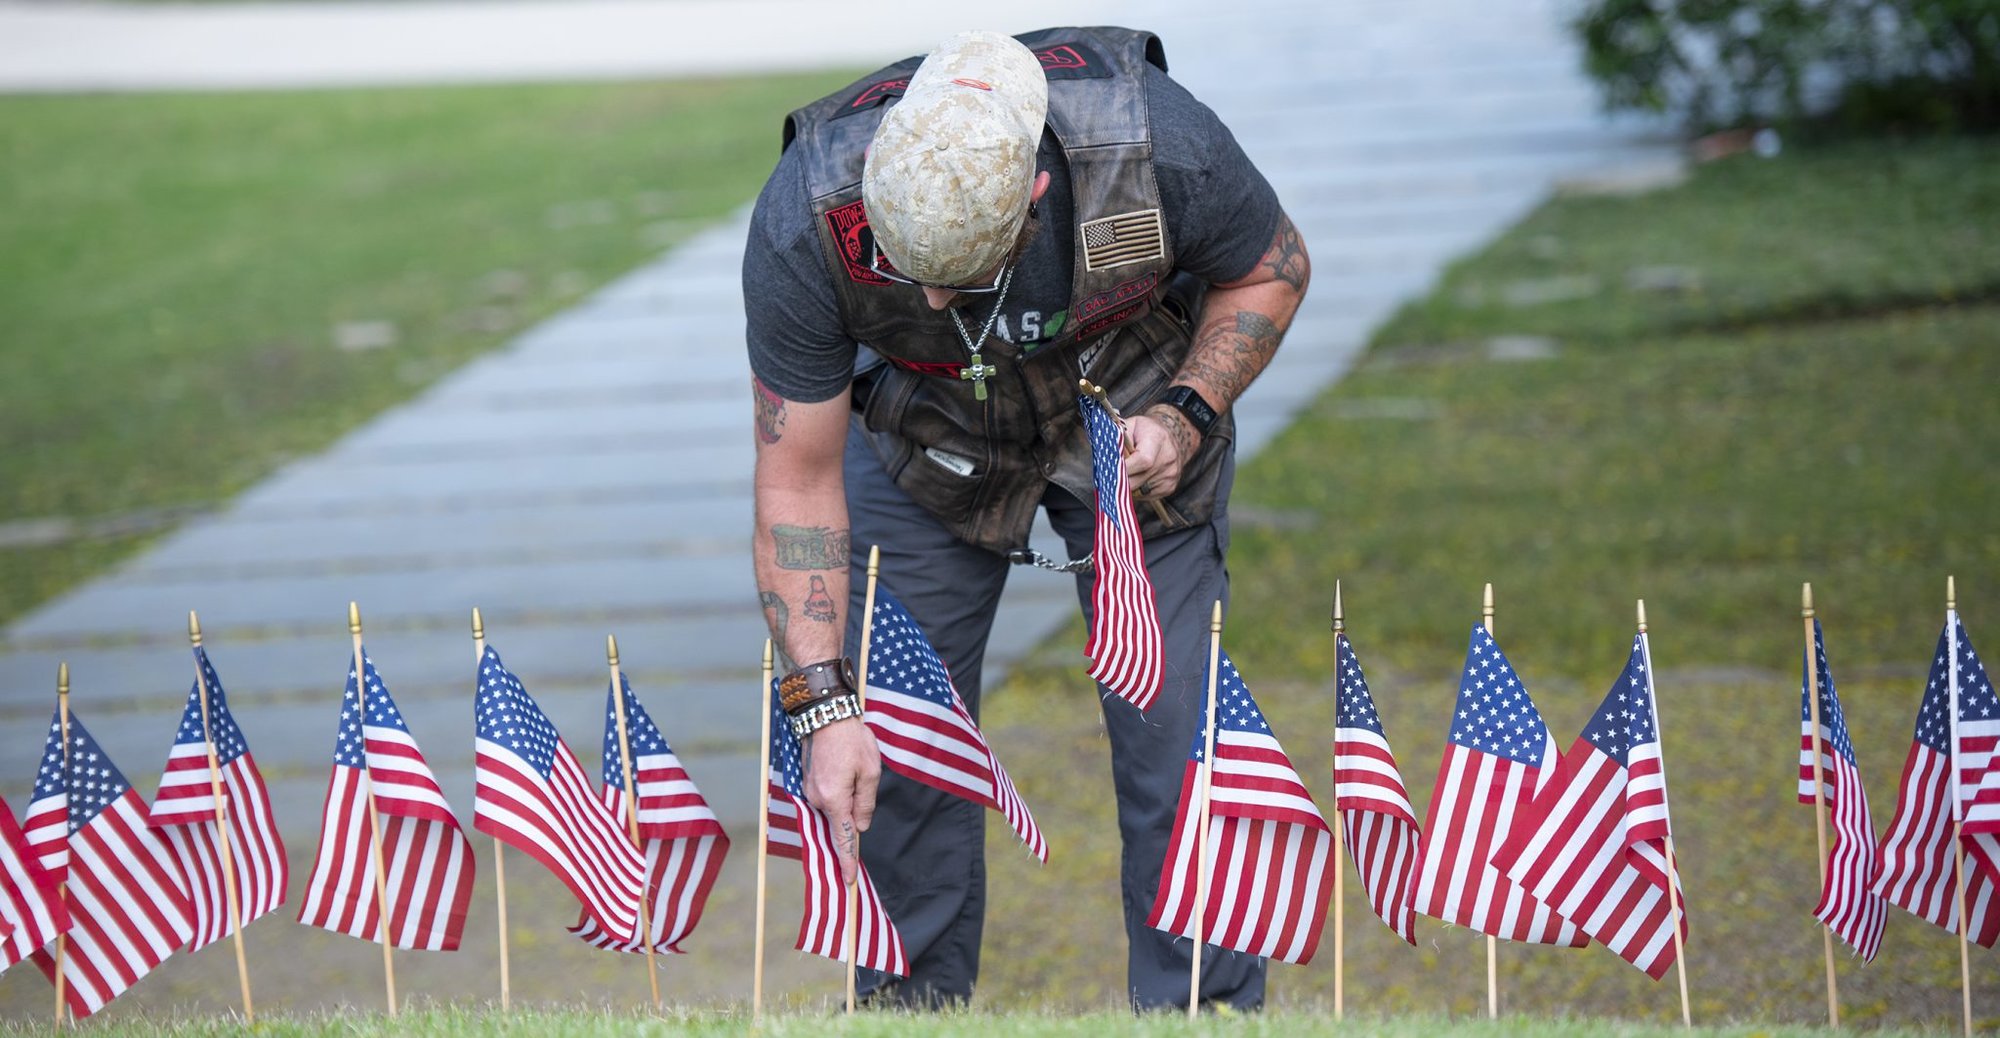 U.S. Army veteran Aaron Murphy places American flags around Clemson University’s Scroll of Honor for upcoming Memorial Day ceremonies, May 24, 2018. Volunteers placed 491 flags around the memorial – one for every Clemson graduate who has given the ultimate sacrifice. (Photo by Ken Scar)